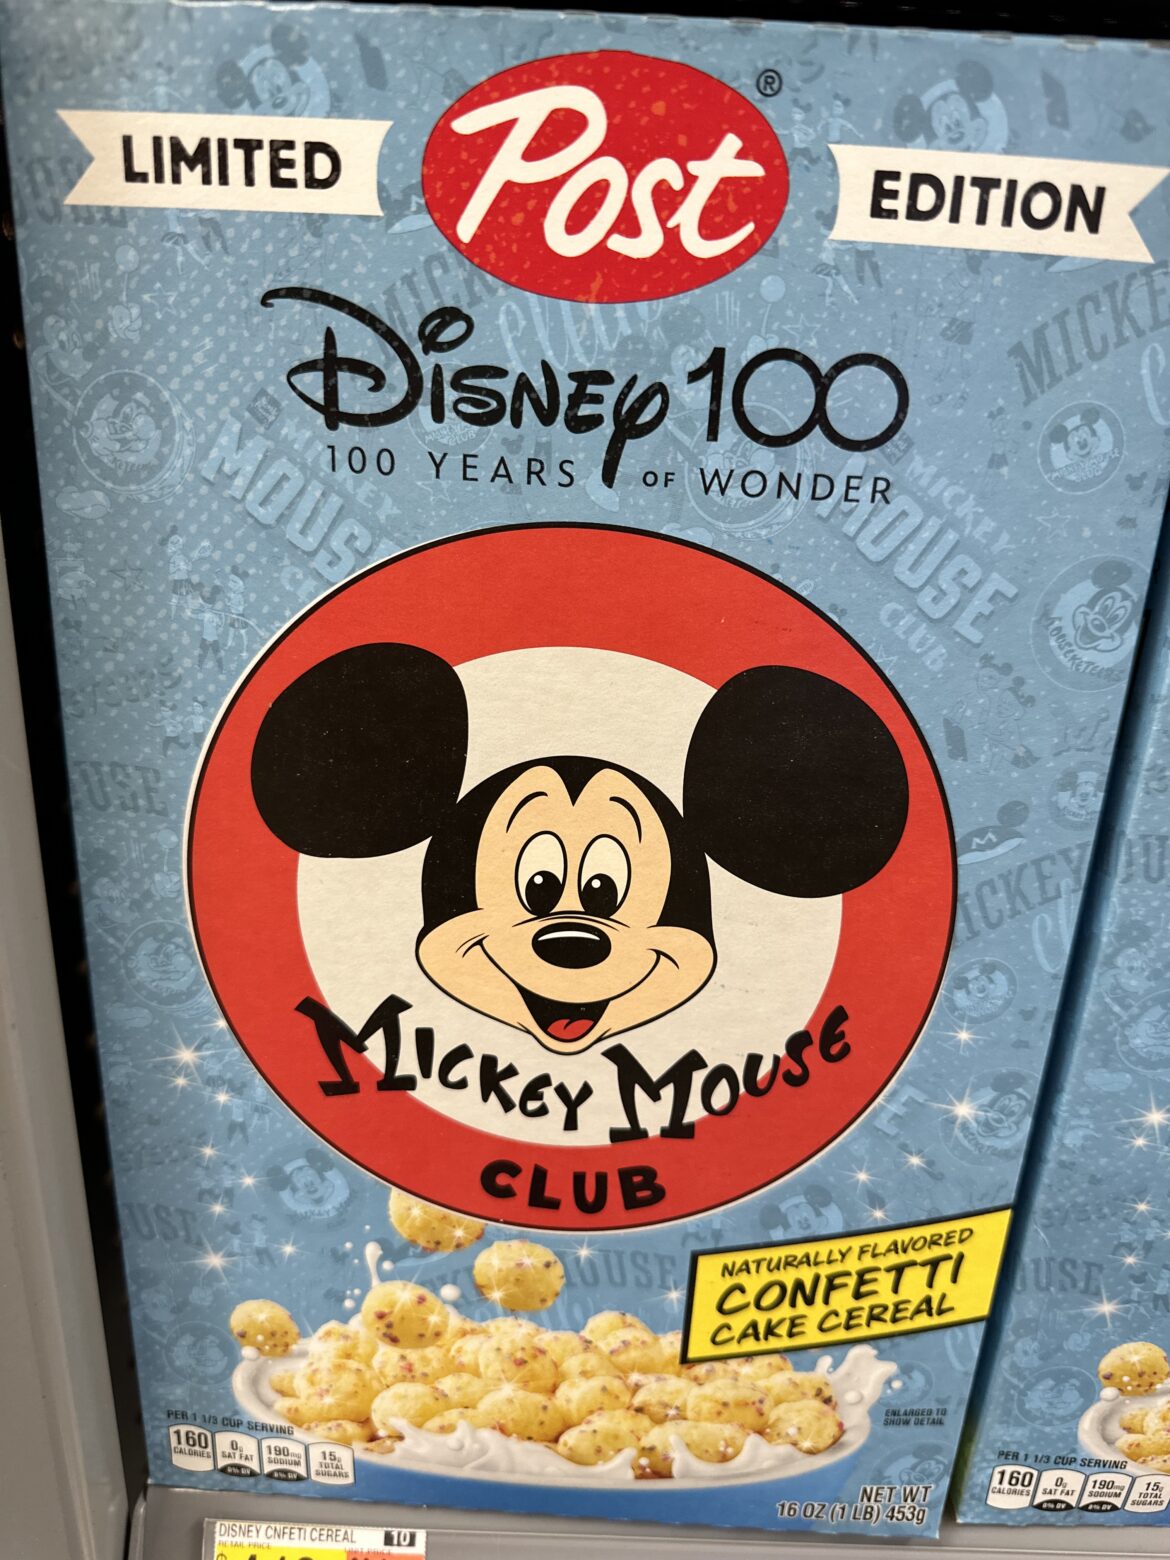 New Limited Edition Mickey Mouse Club Disney100 Cereal Coming Soon